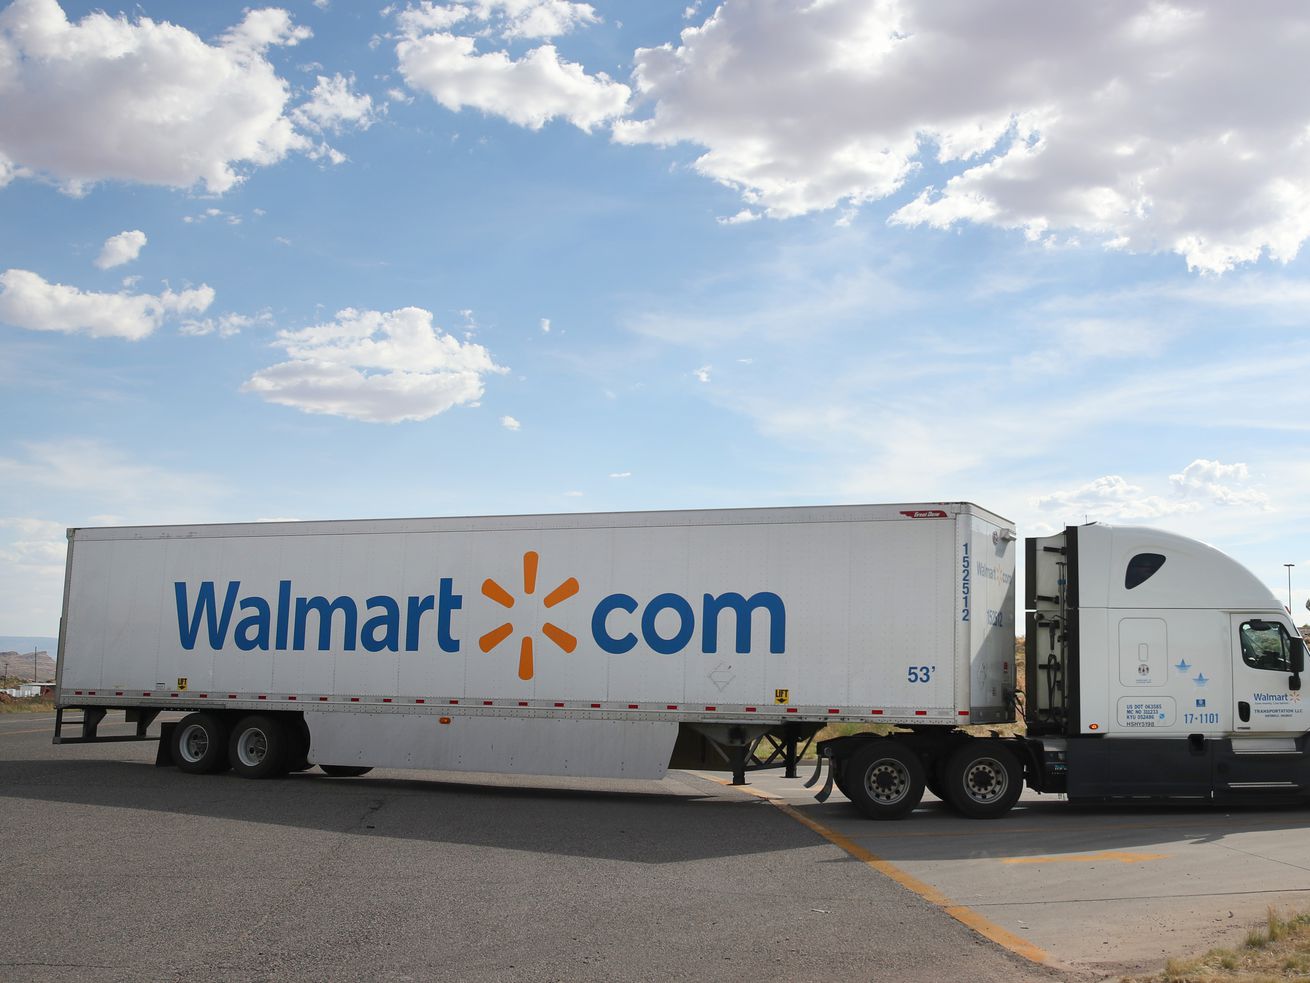 A Walmart tractor-trailer truck with walmart.com on its side leaves a parking lot.